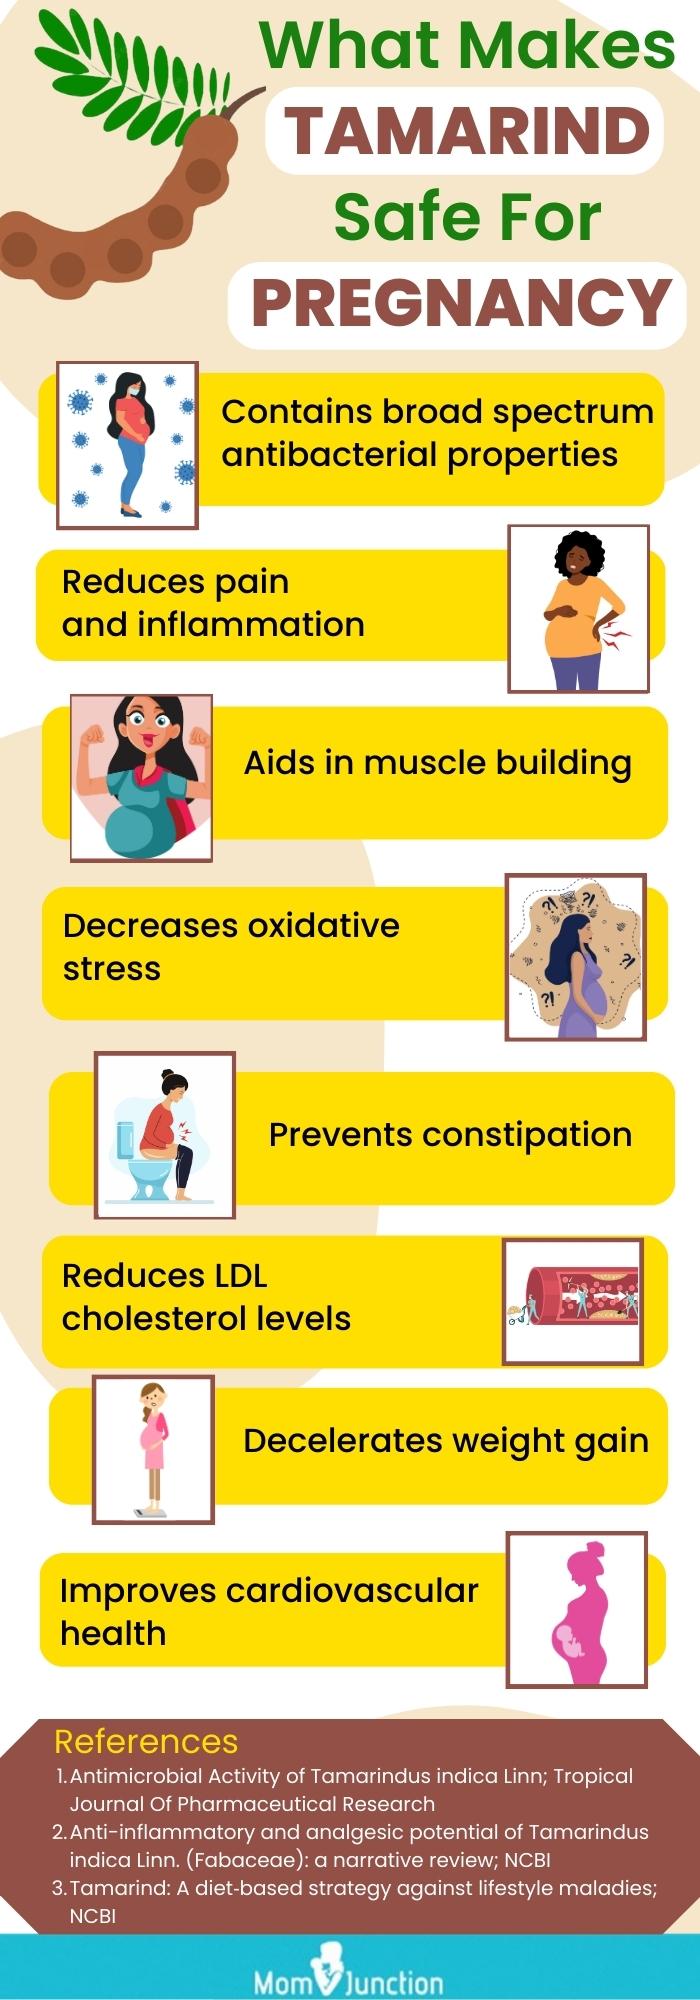 what makes tamarind safe for pregnancy (infographic)